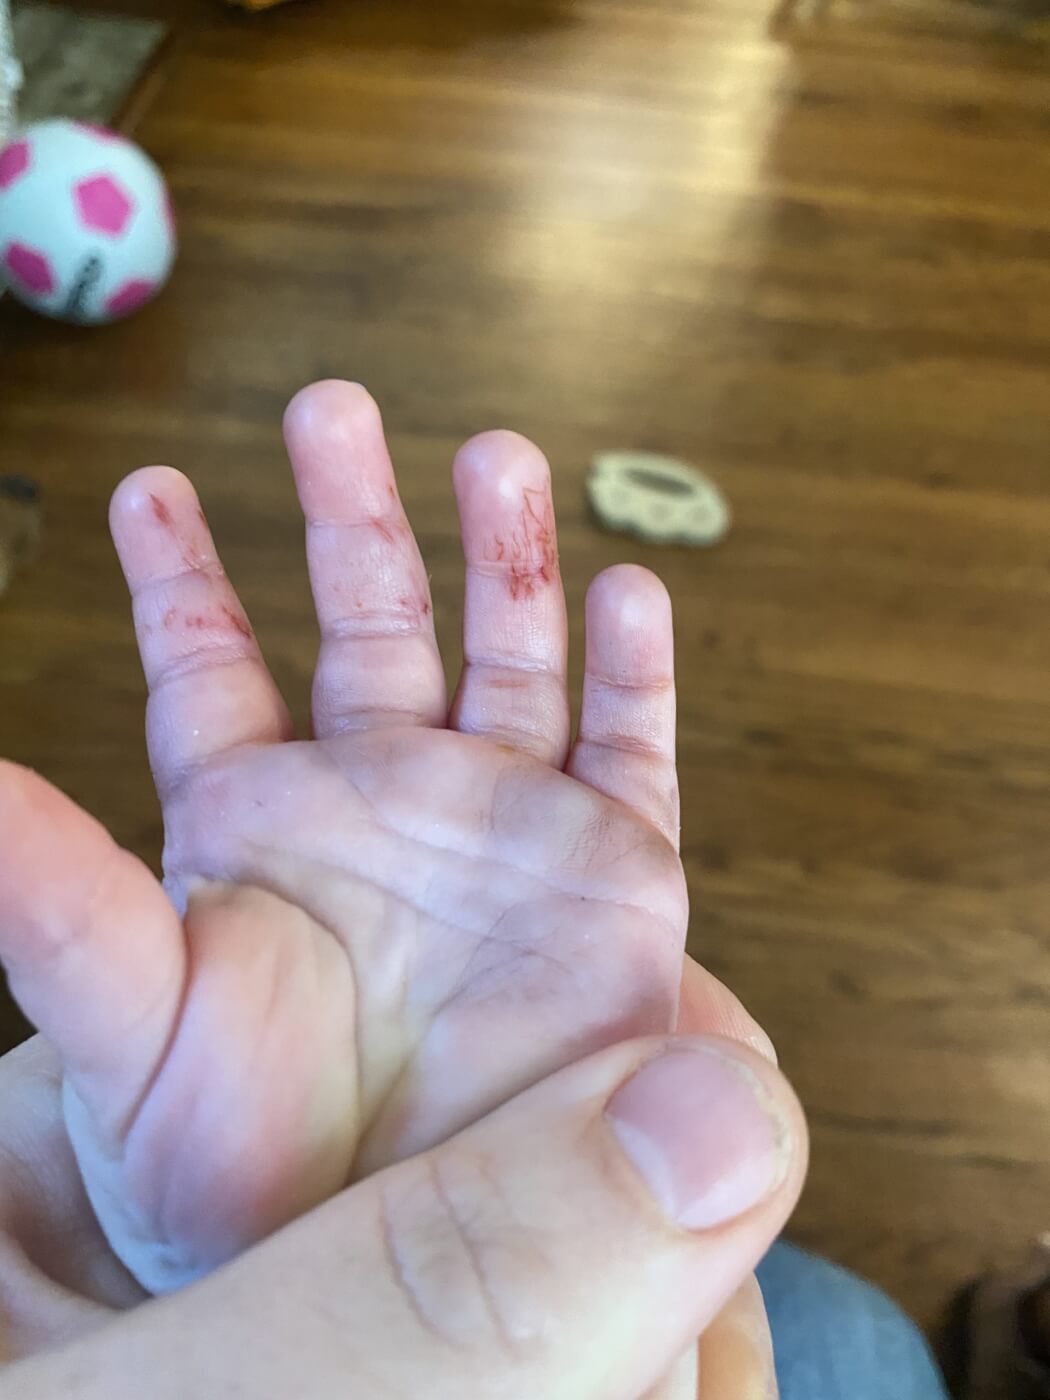 Seaquest: Baby's hand bitten by fish